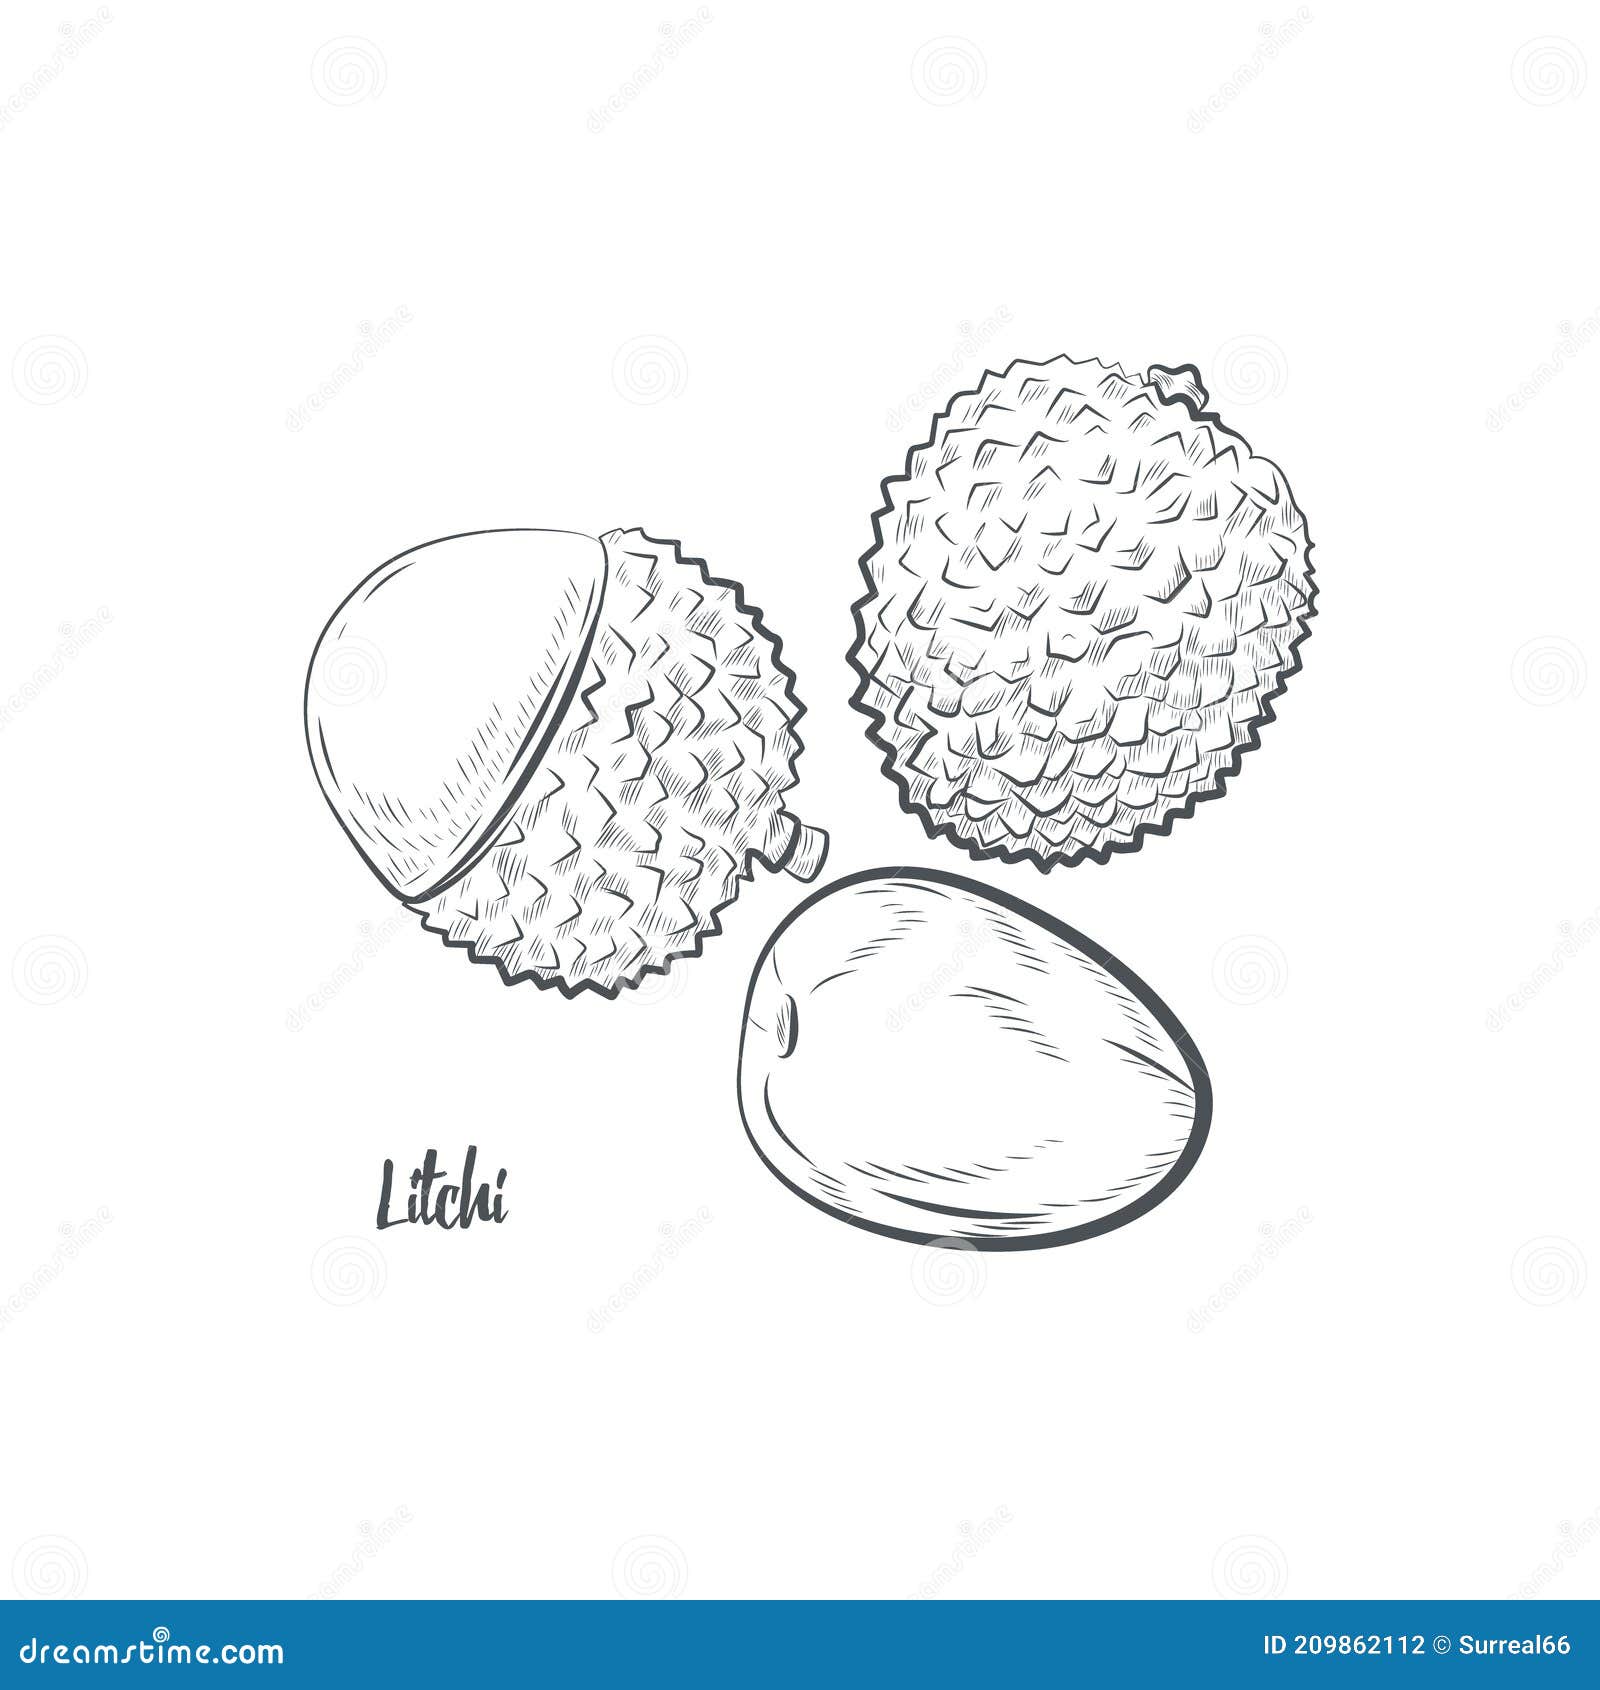 Lychee Sketch Stock Photos and Images - 123RF